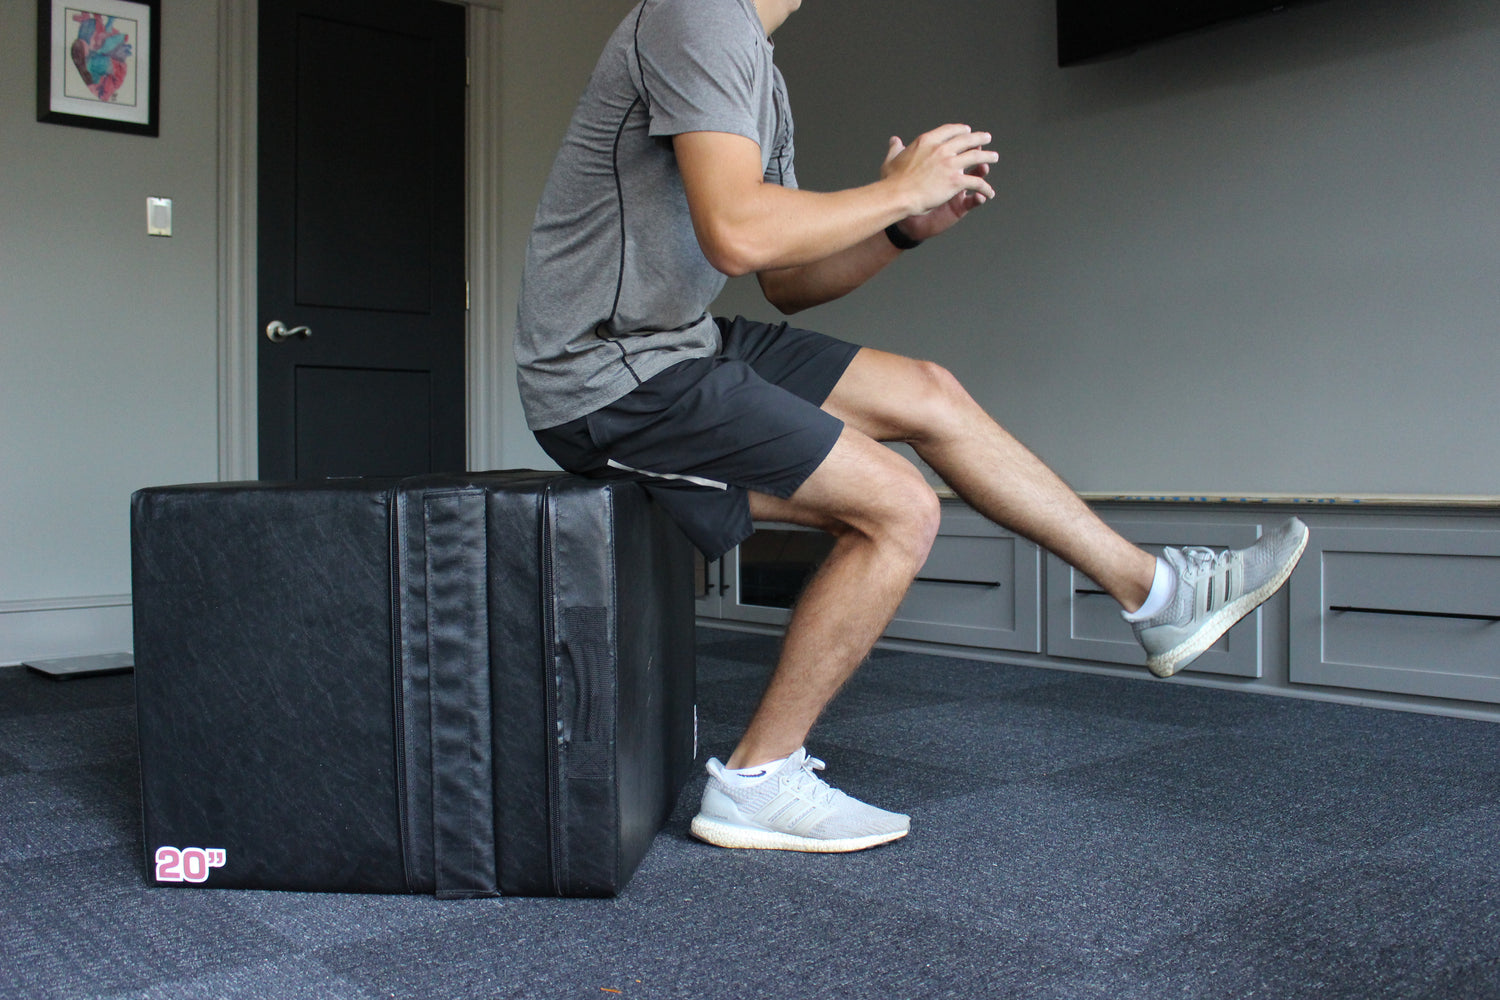 Enhancing Physical Therapy with the Resilite Six-in-One Plyo Box